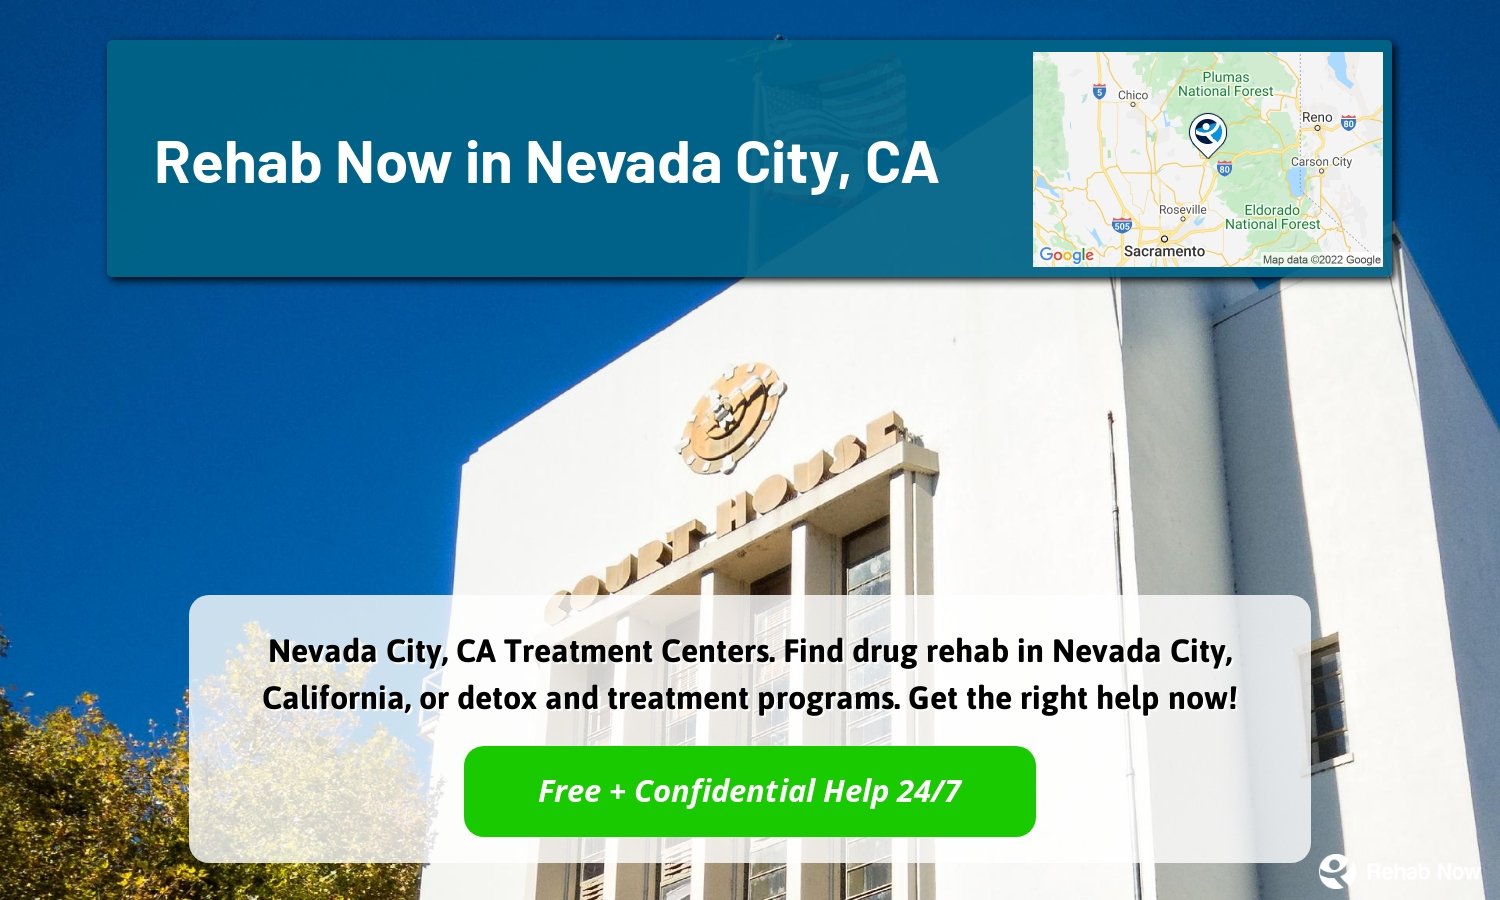 Nevada City, CA Treatment Centers. Find drug rehab in Nevada City, California, or detox and treatment programs. Get the right help now!